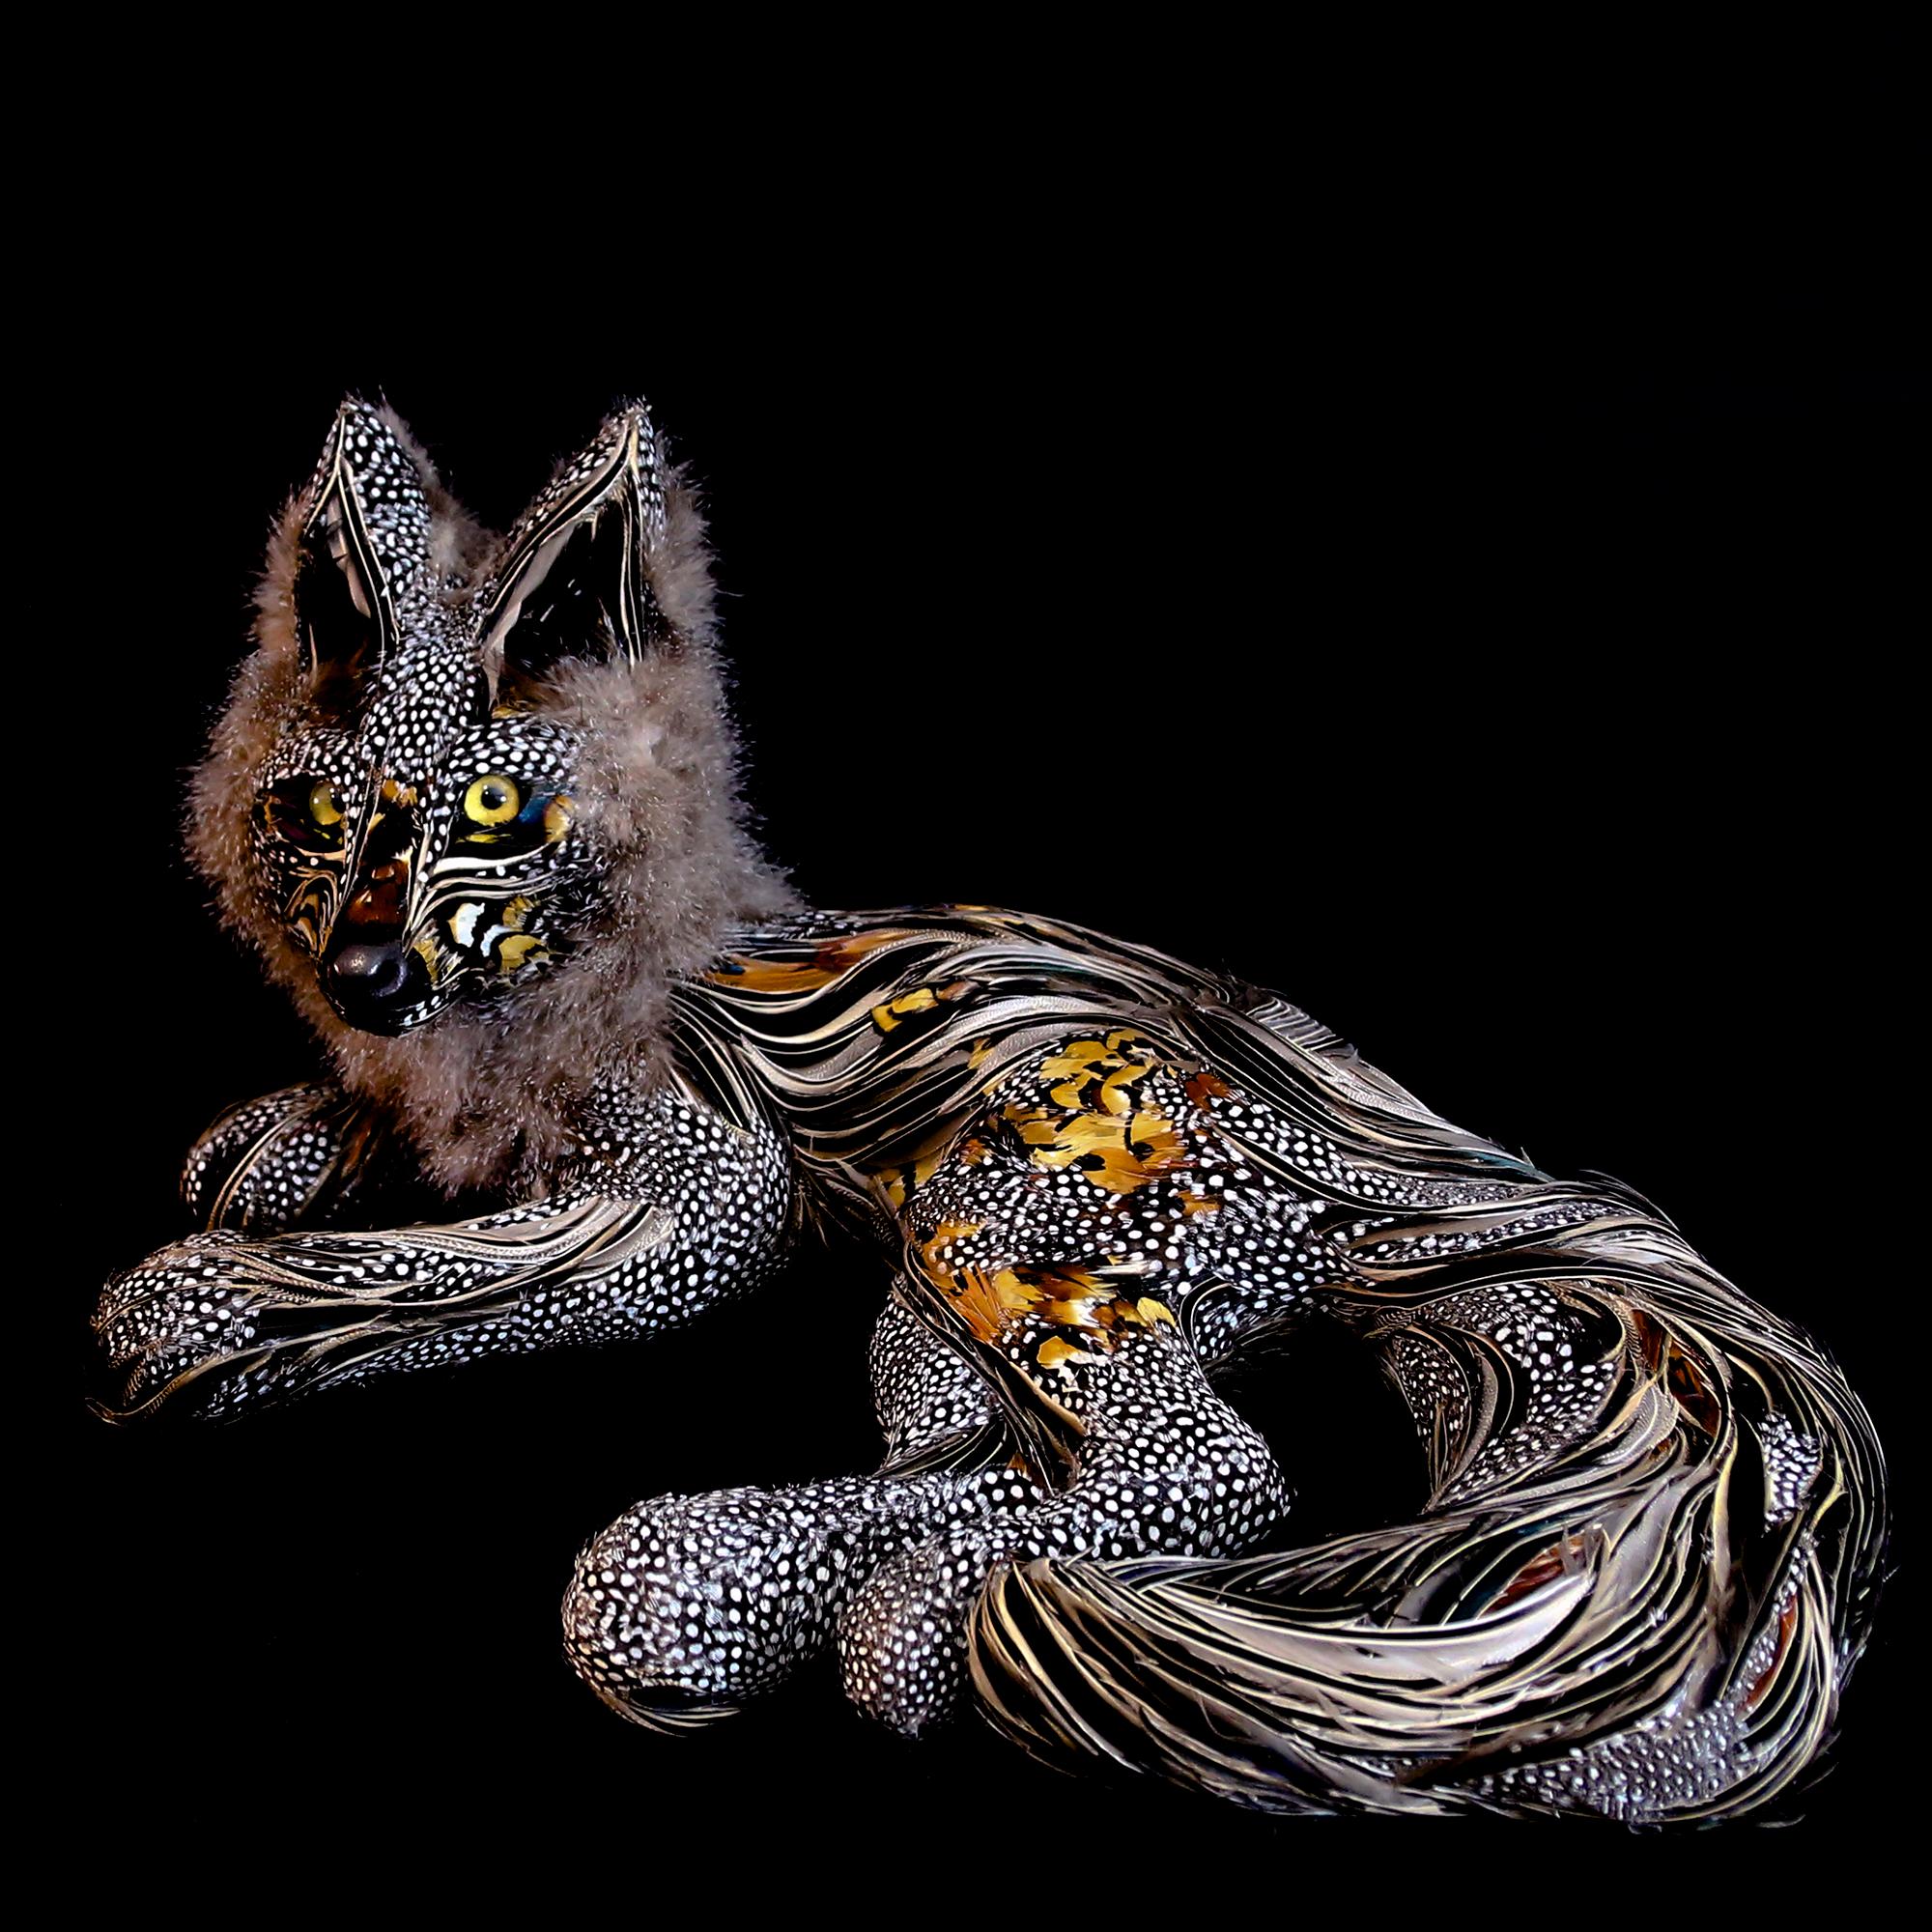 Bernard, Fox, Recycled feathers on resin sculpture - Sculpture by Laurence Le Constant